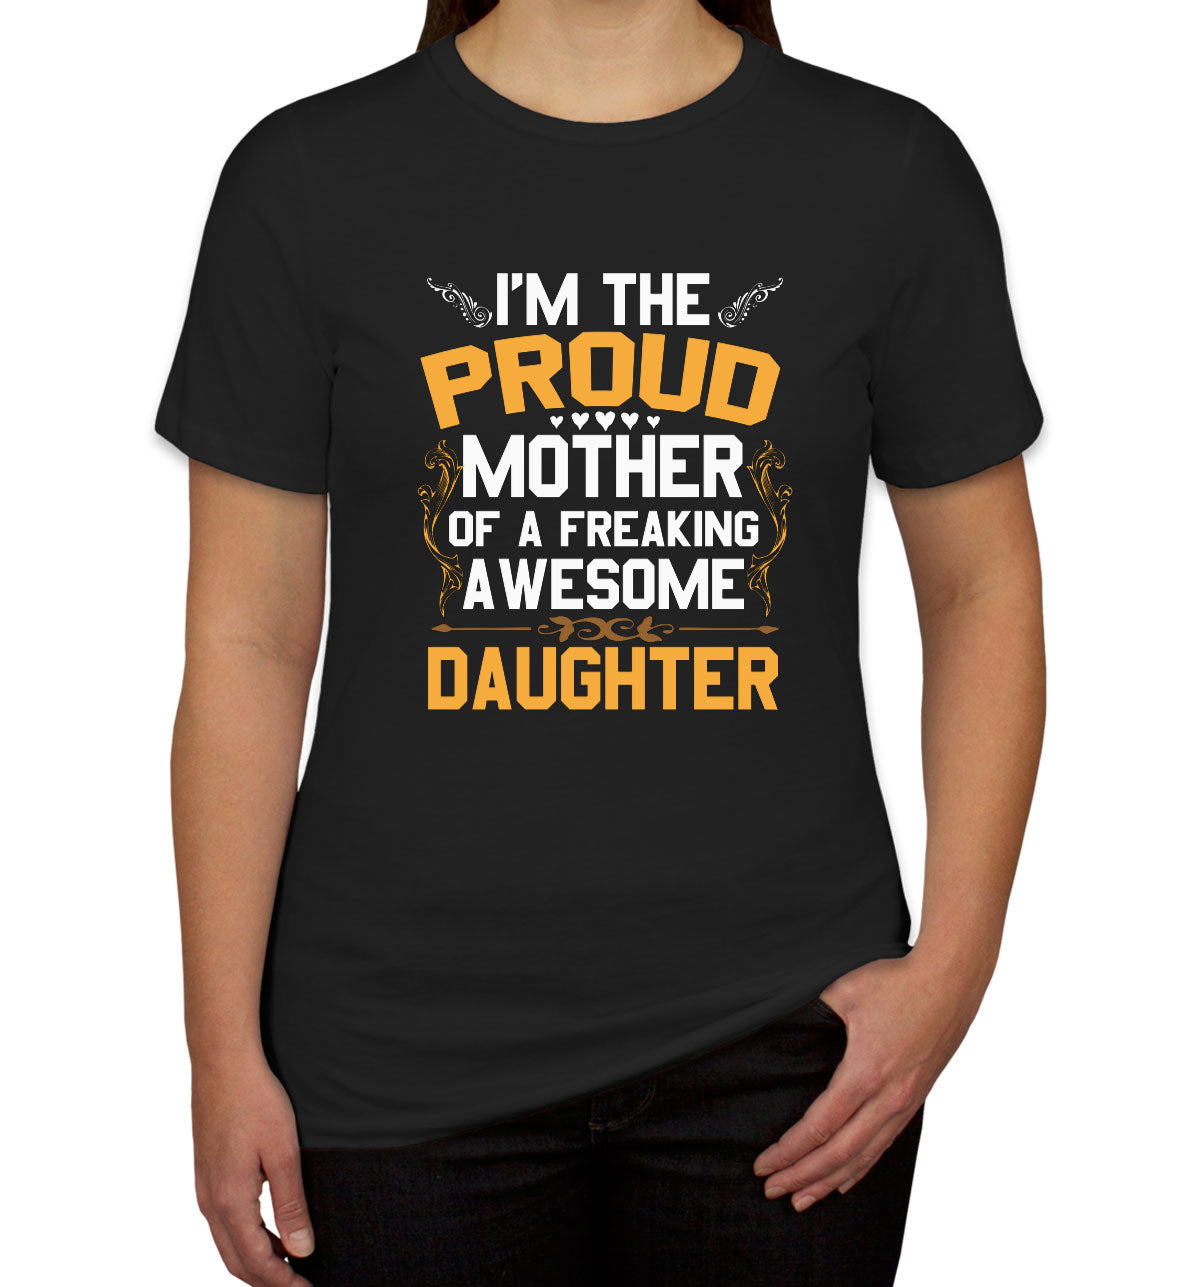 I'm The Proud Mother Of A Freaking Awesome Daughter Women's T-shirt